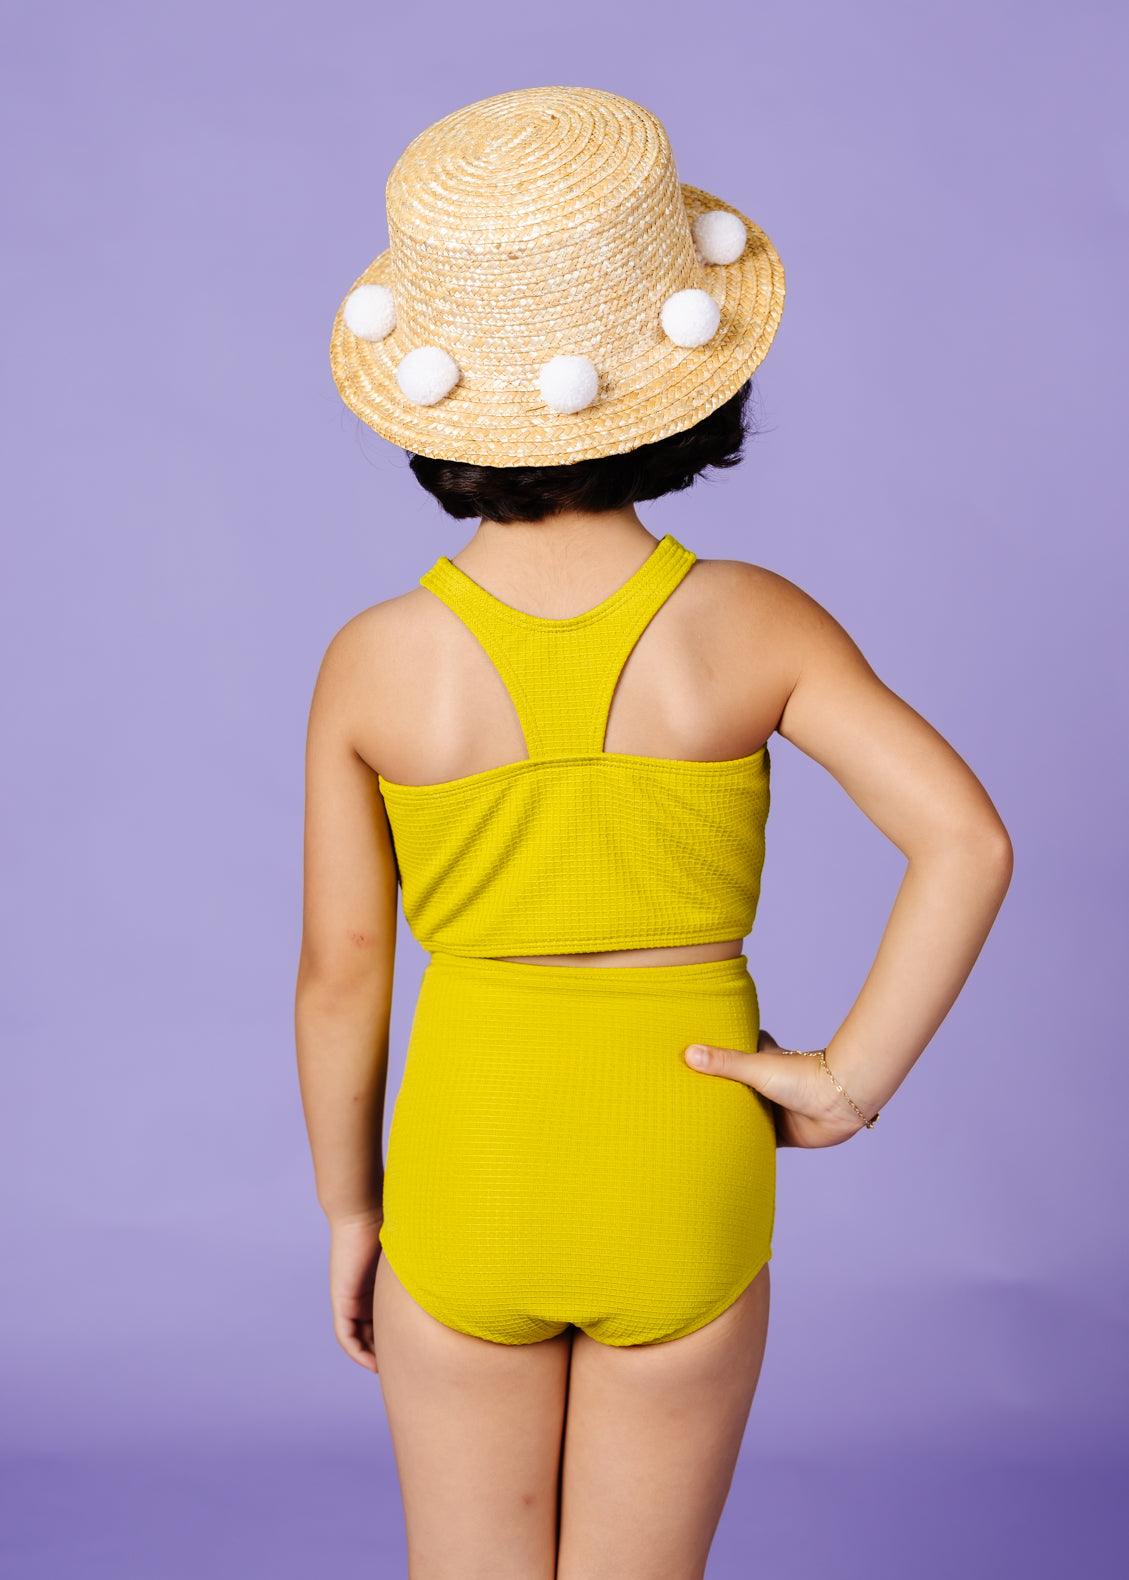 Girls Crop Top Swimsuit - Waffled Pear